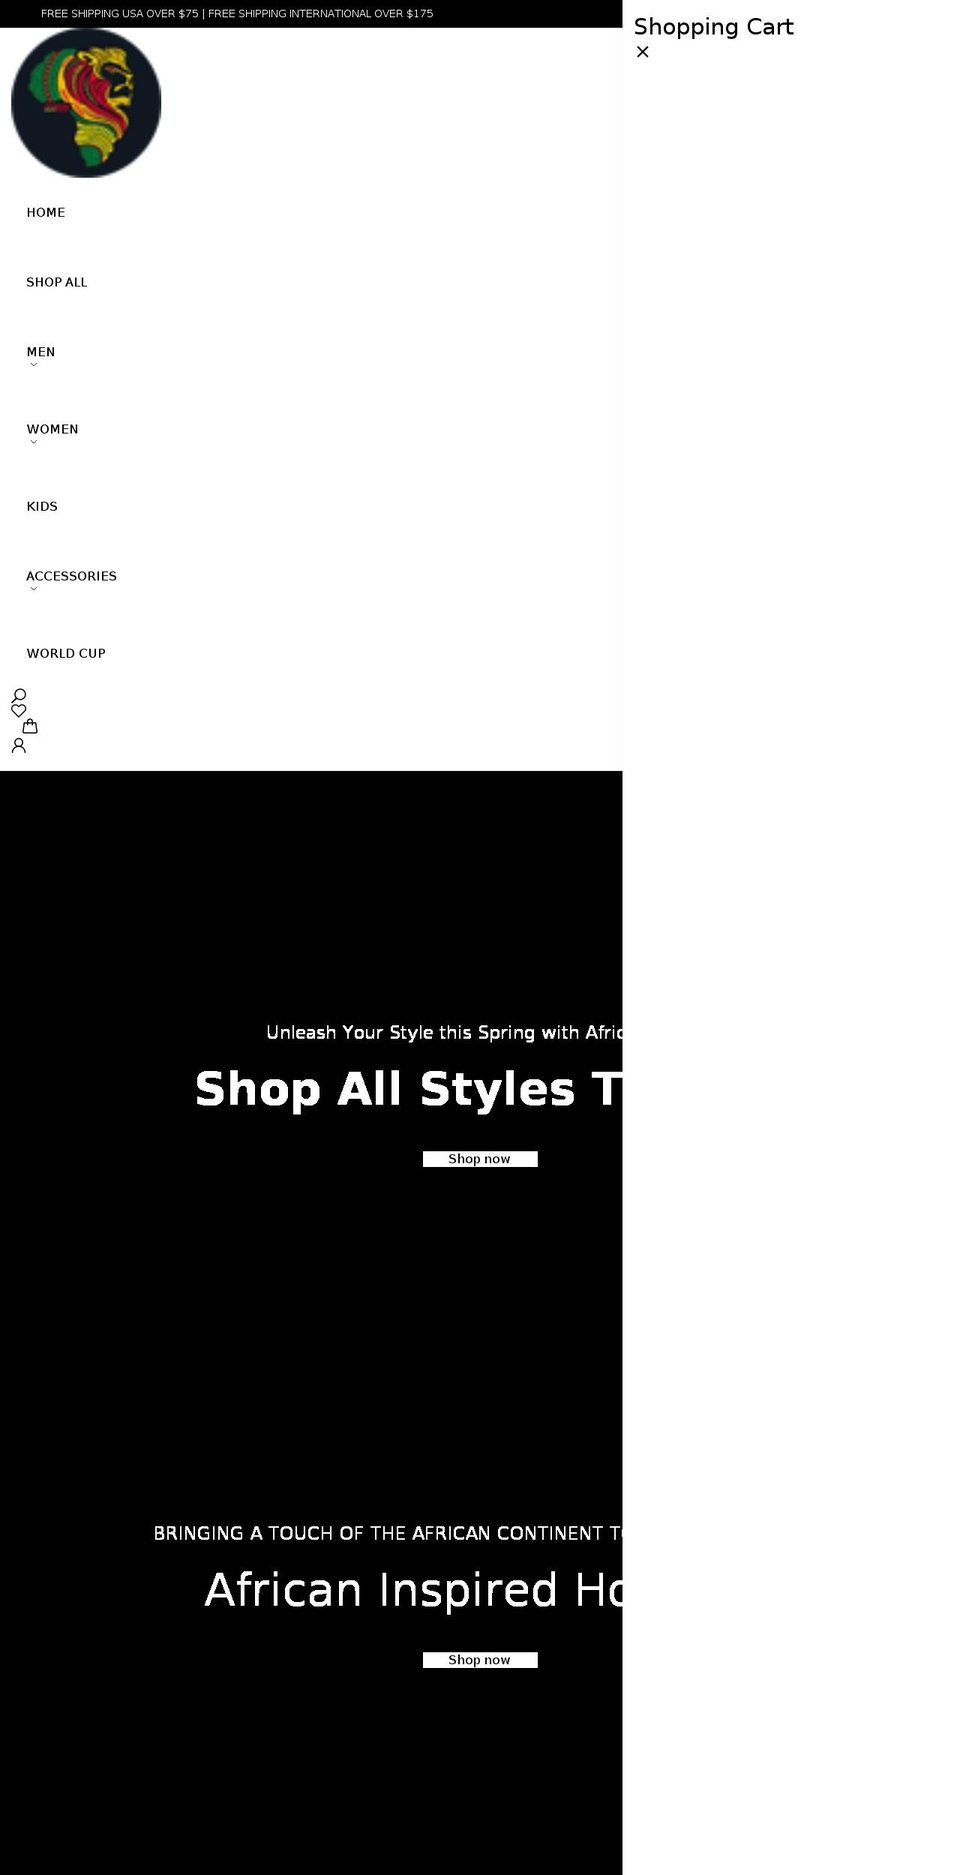 Storepify Shopify theme site example africanrich.com